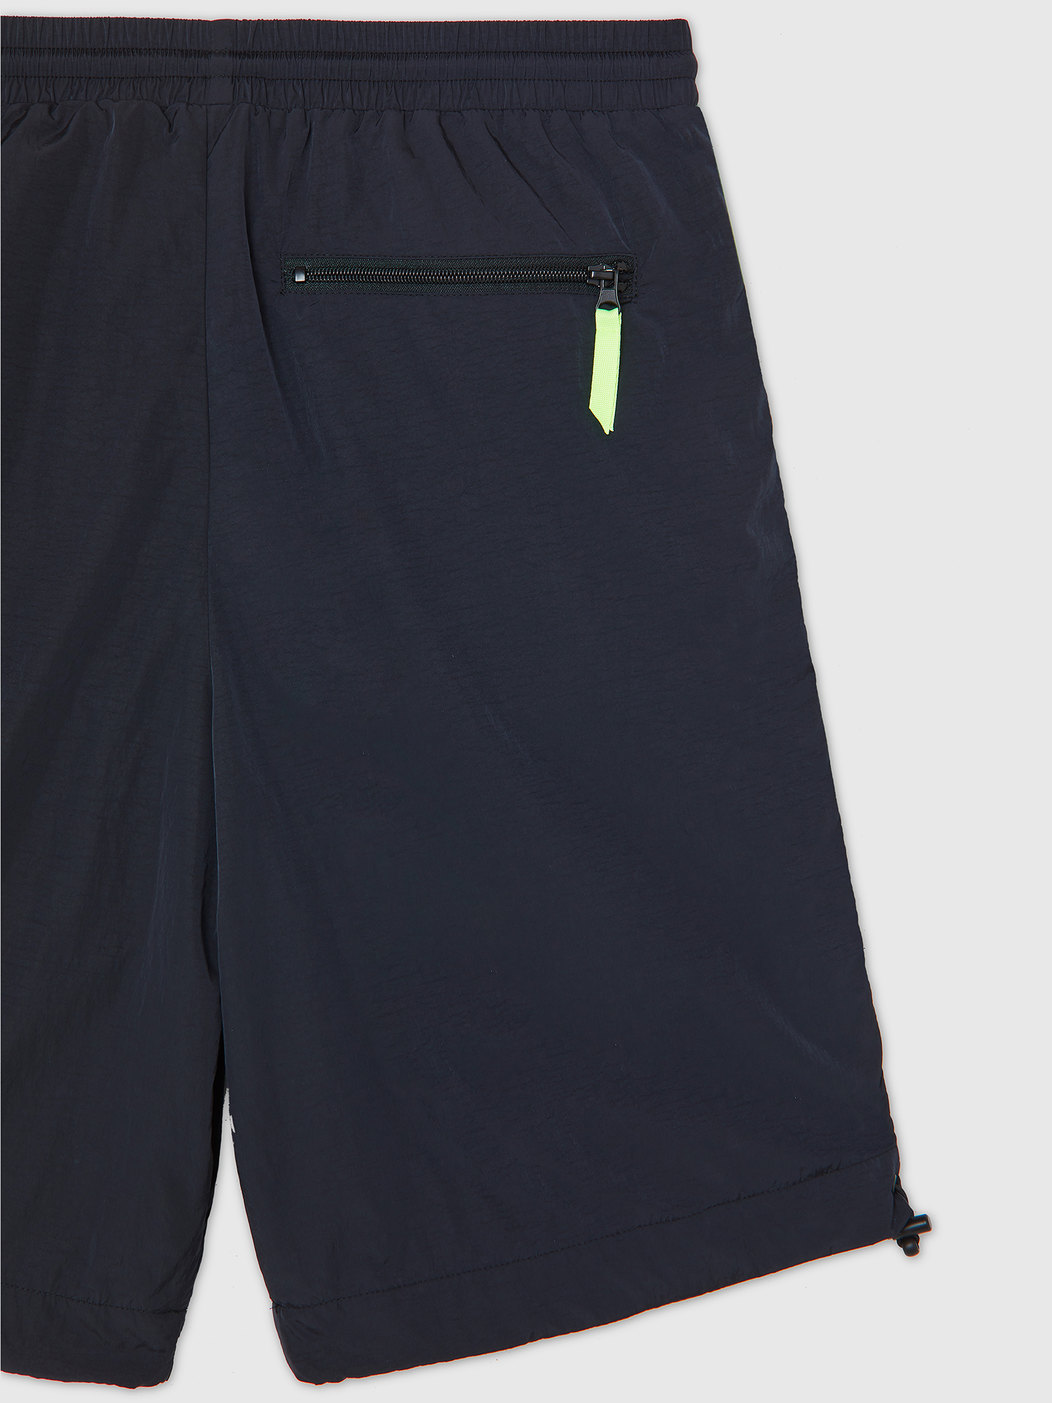 Nylon Shorts With Neon Bands